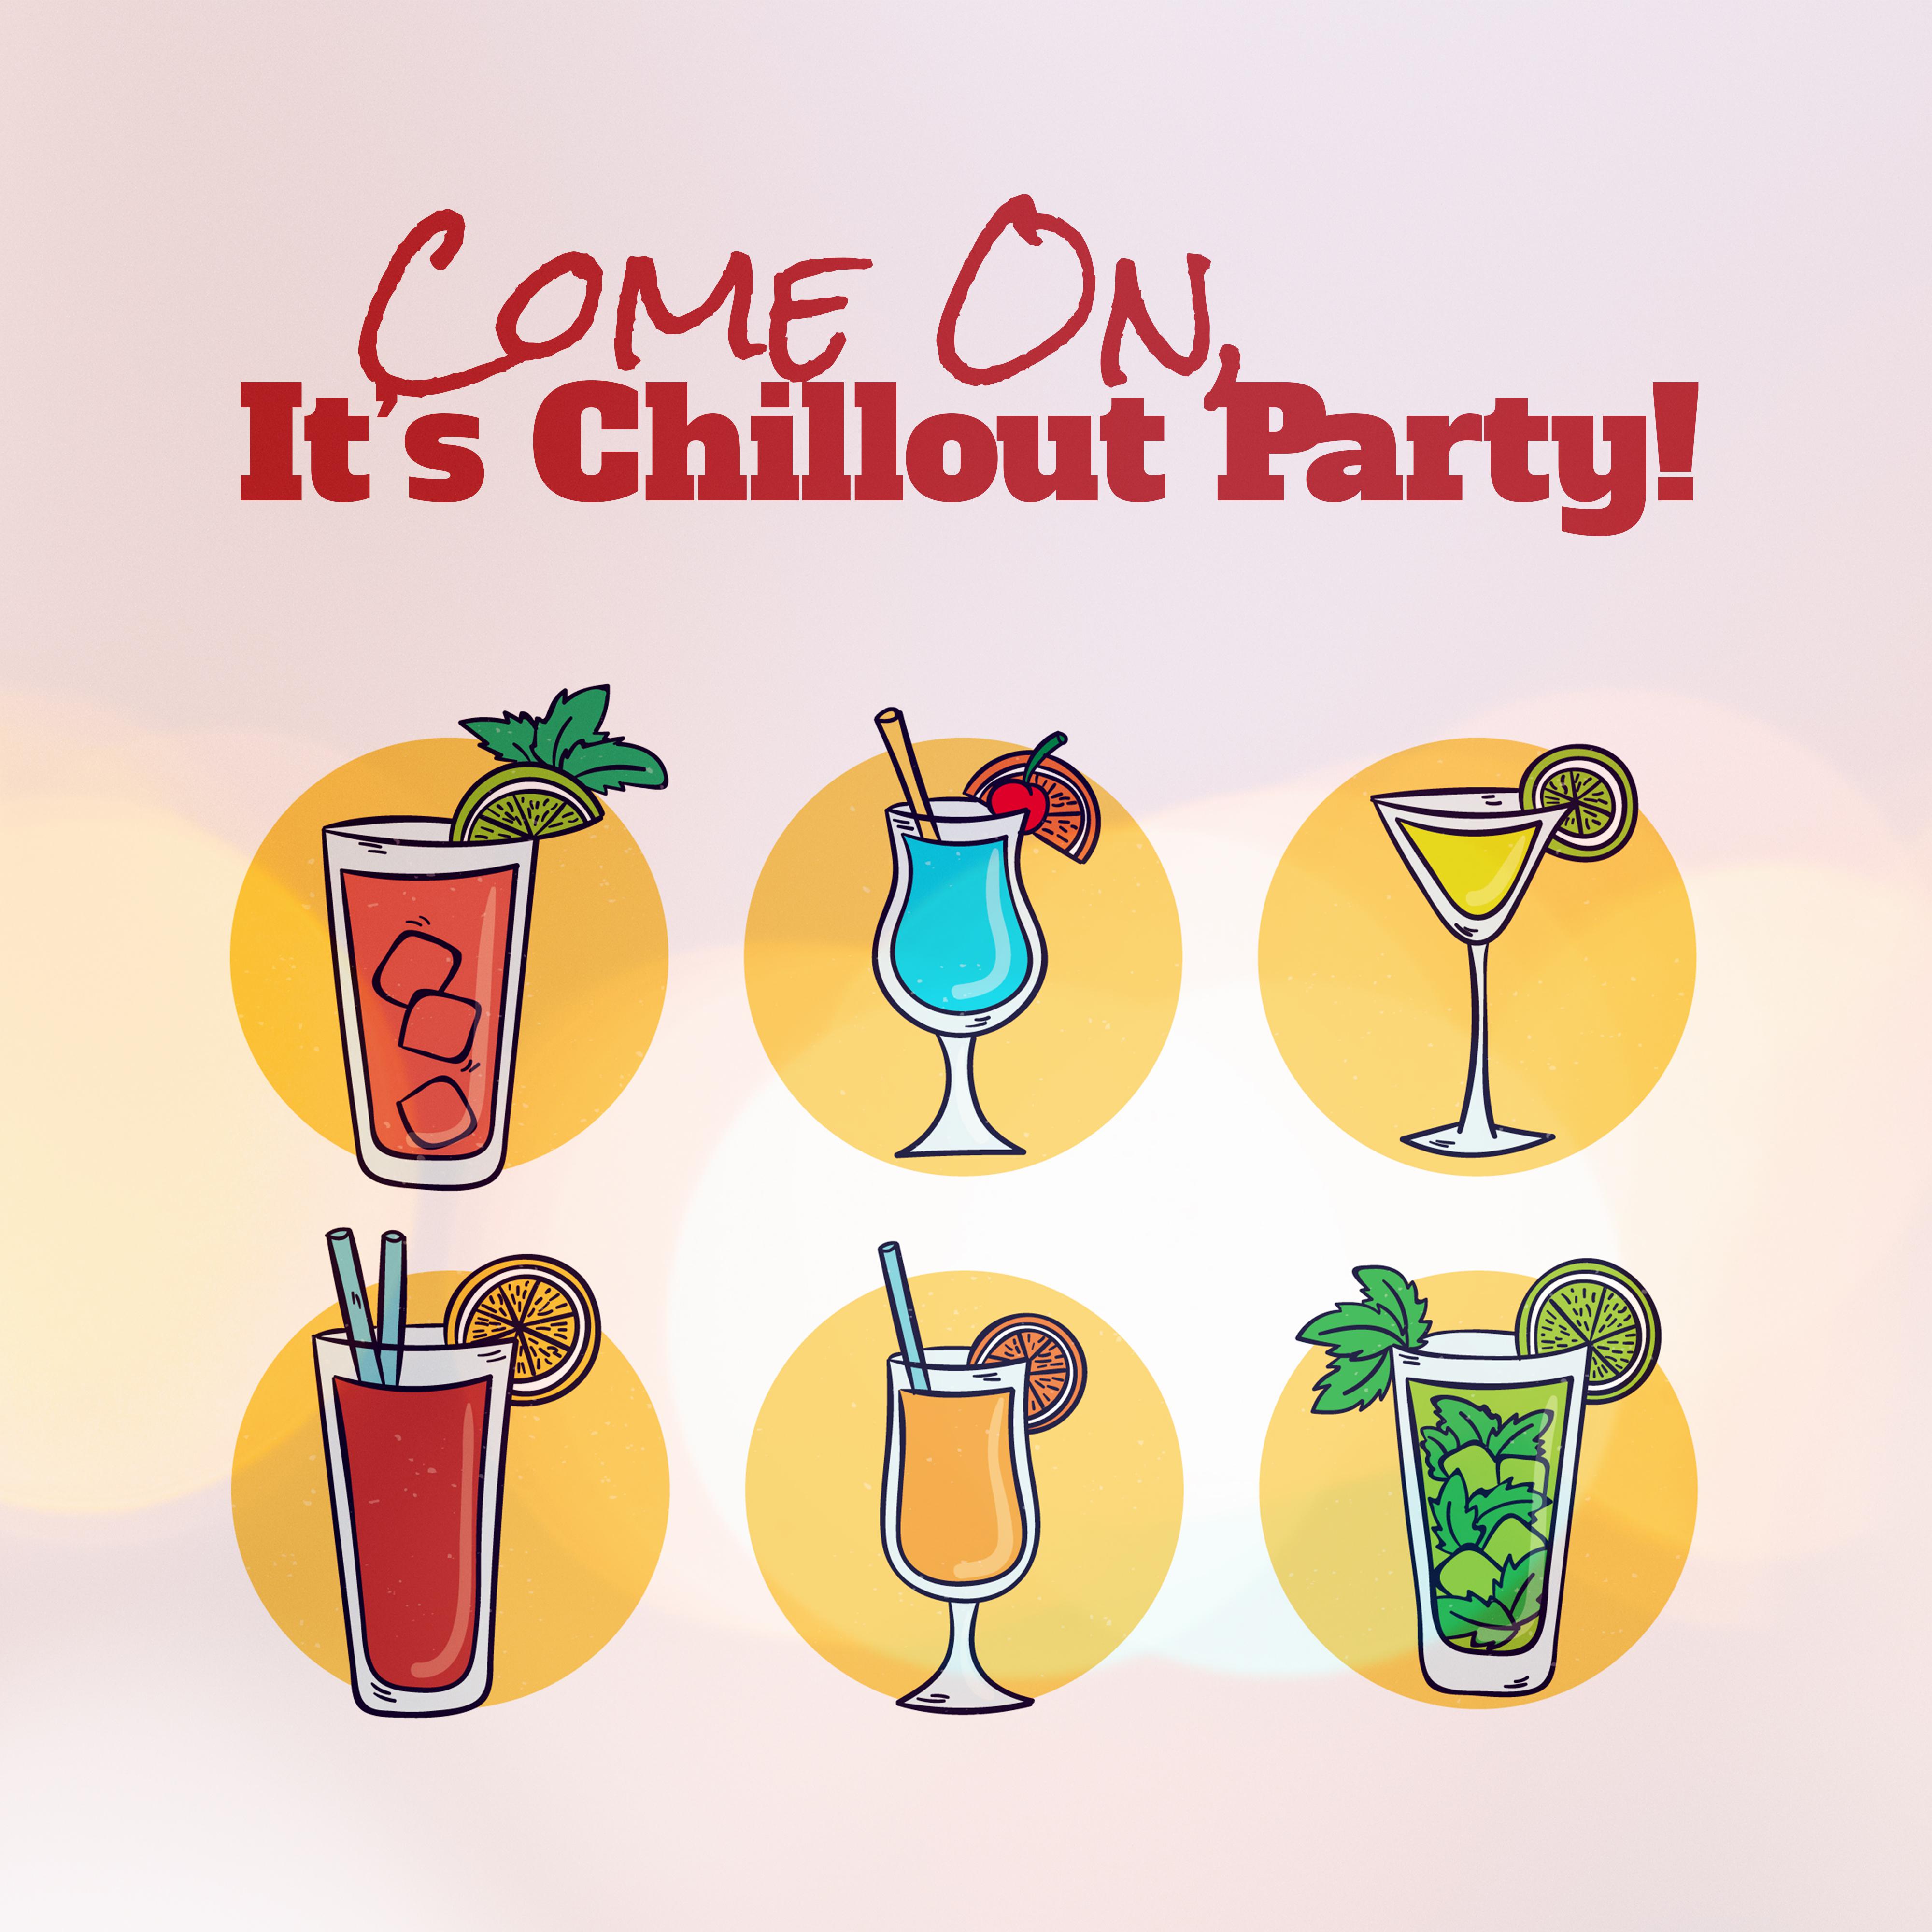 Come On, It' s Chillout Party!  2019 Electronic Chill Out Best Party Beats, Happy Deep Music for Dancing, Pool Party or Clubbing, Low BPM Top Vibes